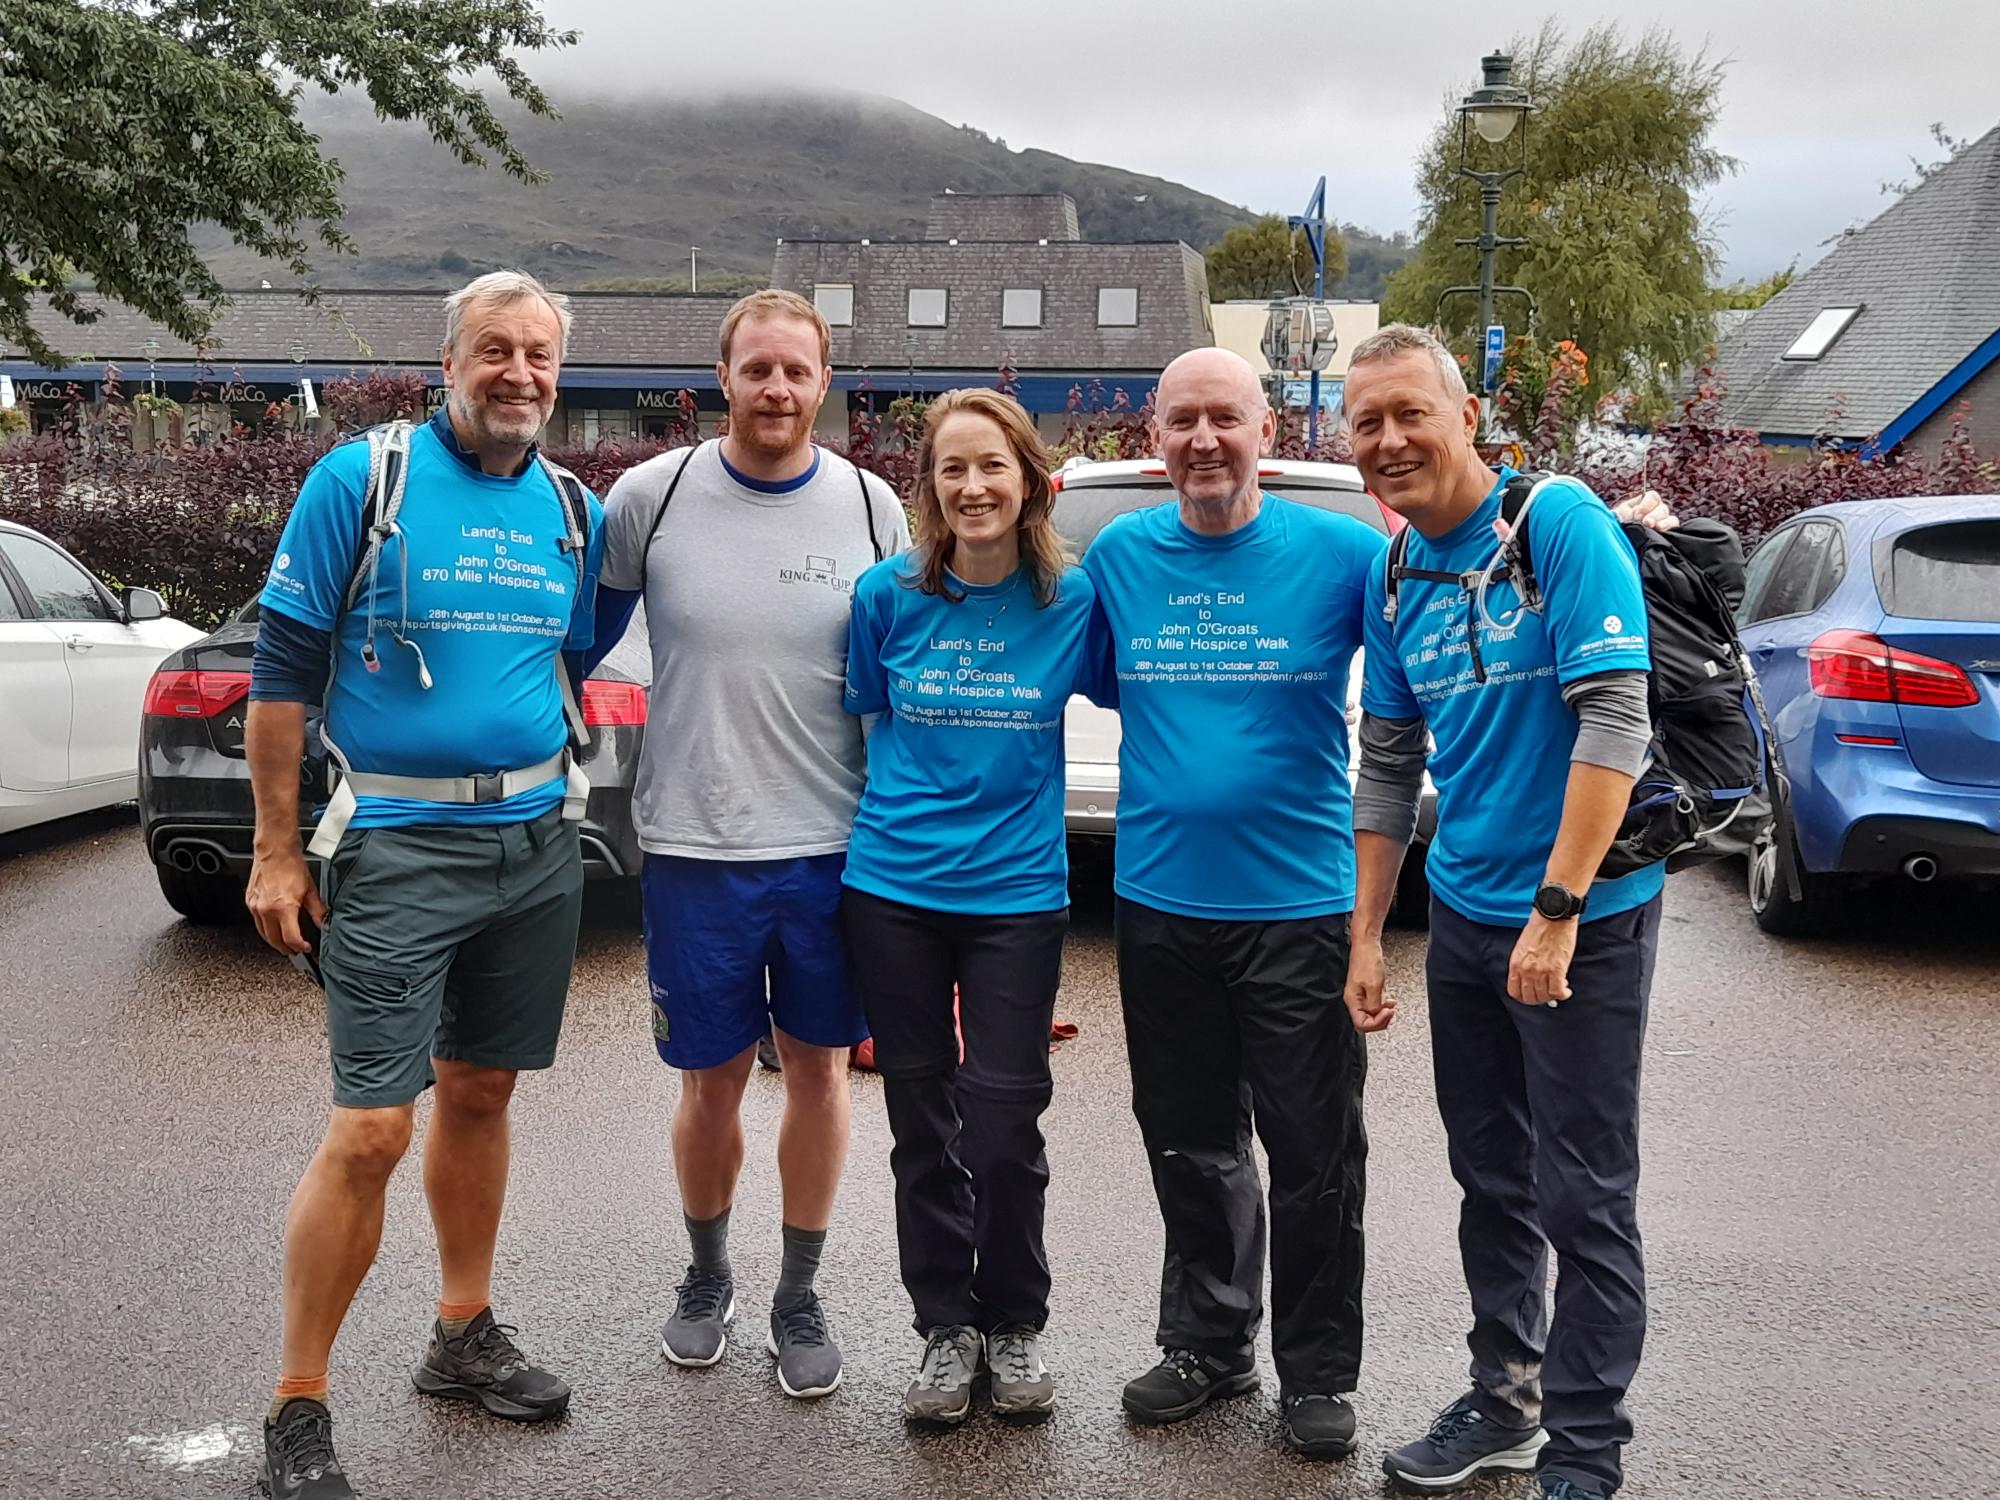 Mike_second_from_right_joining_his_friends_for_the_final_week-long_leg_of_their_Land_s_End_to_John_O_Groats_fundraising_walk._1.jpg